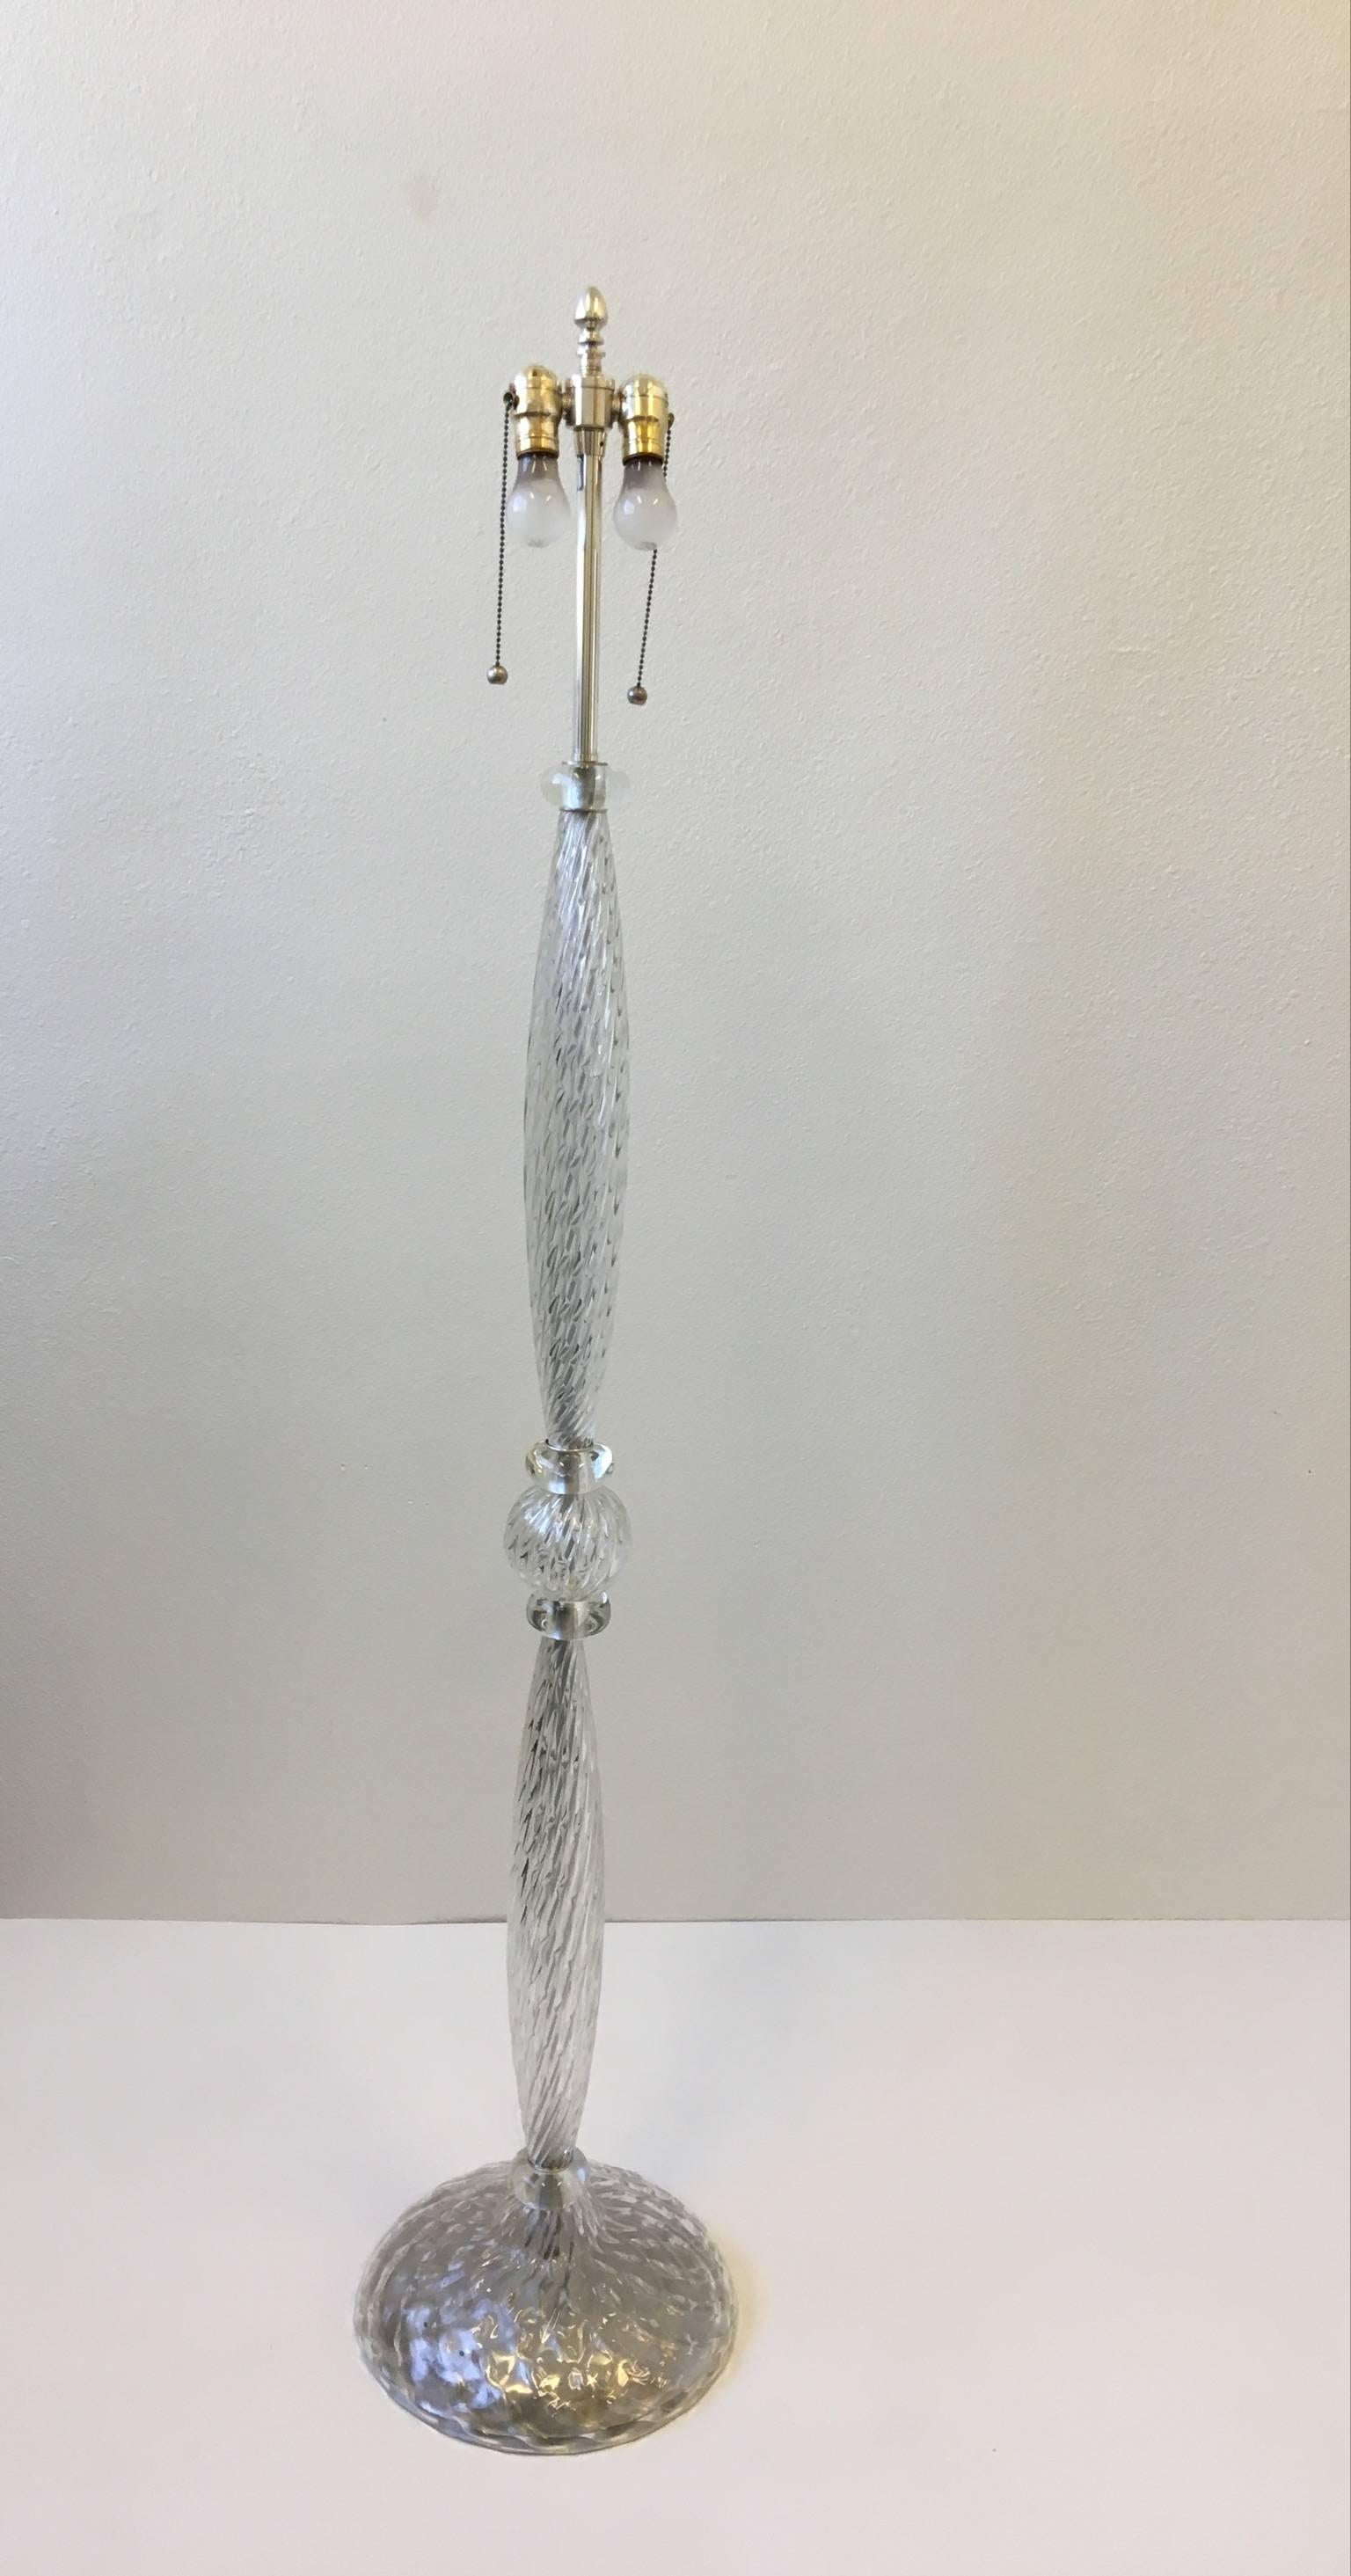 Italian Murano Glass and Silver Floor Lamp by Venini for Marbro Lamps Co.